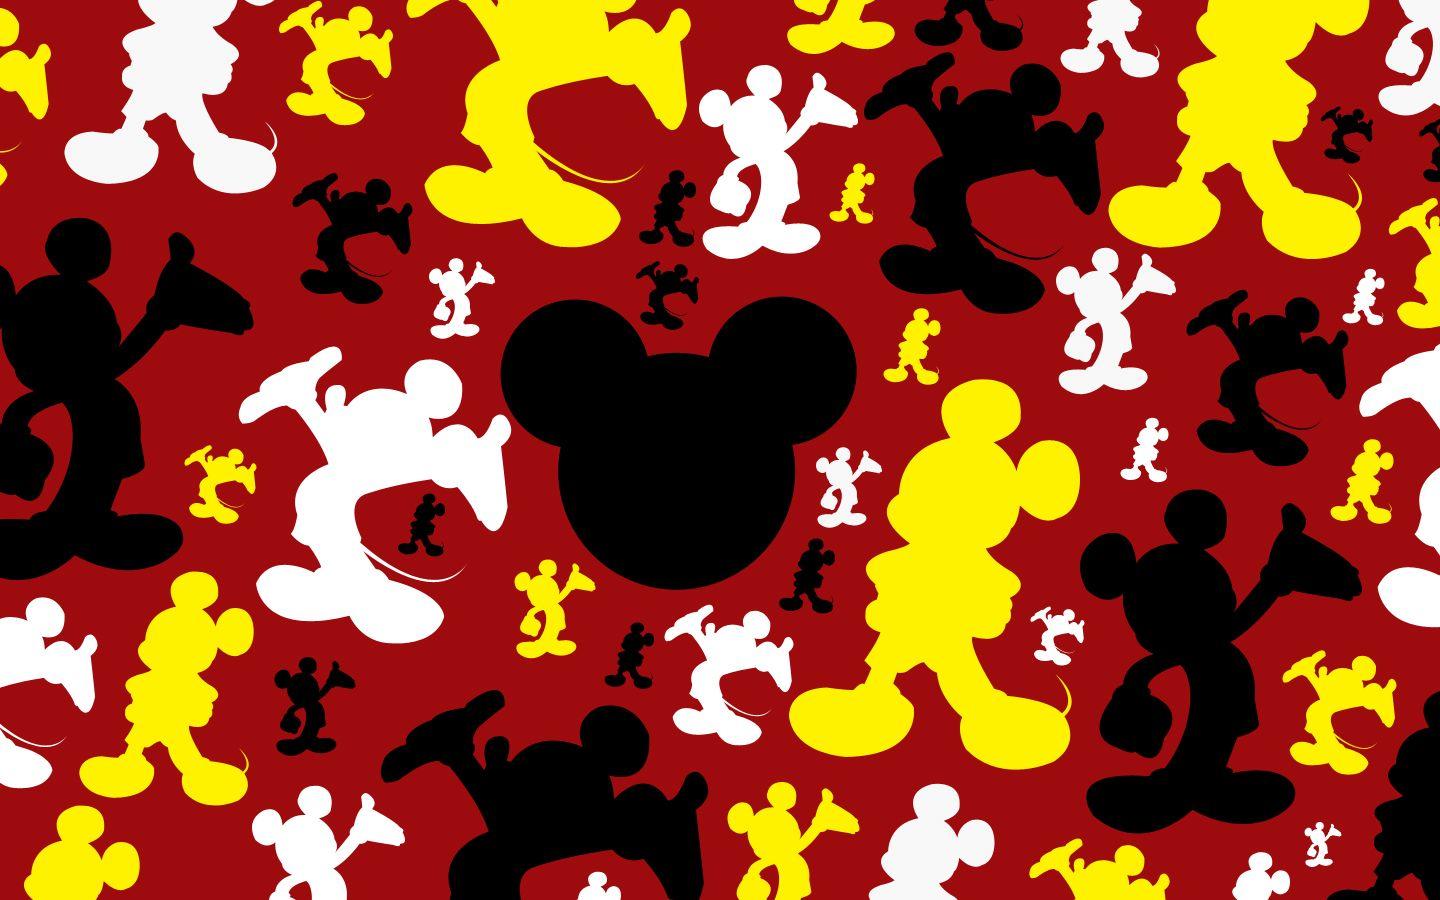 Mitomania dc: Mickey Mouse characters Image Wallpaper, Background